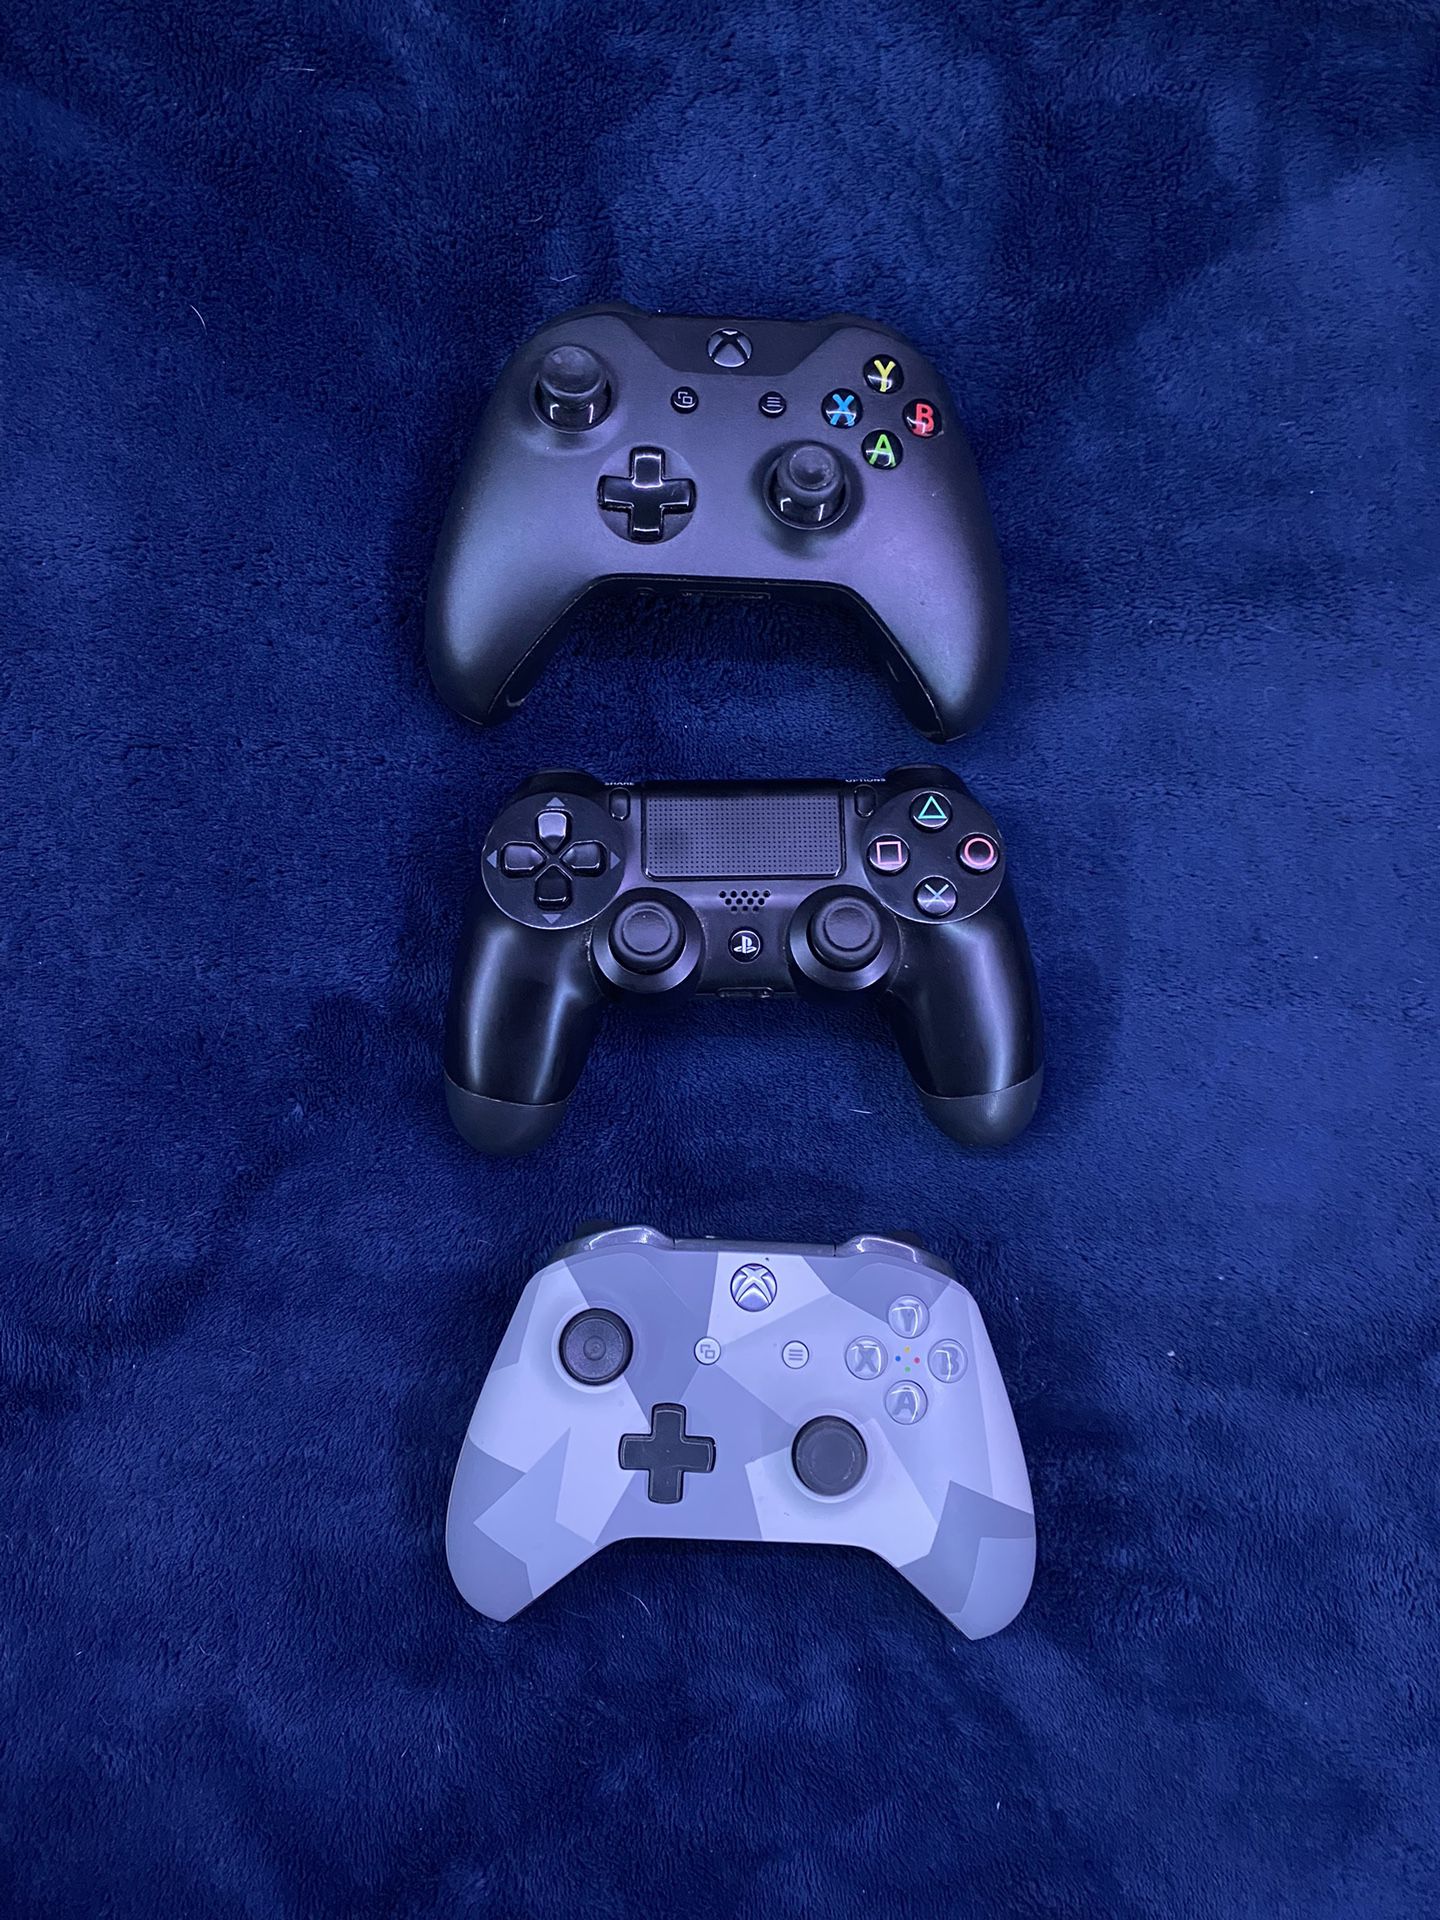 Selling 3 Controllers NEED GONE ASAP‼️